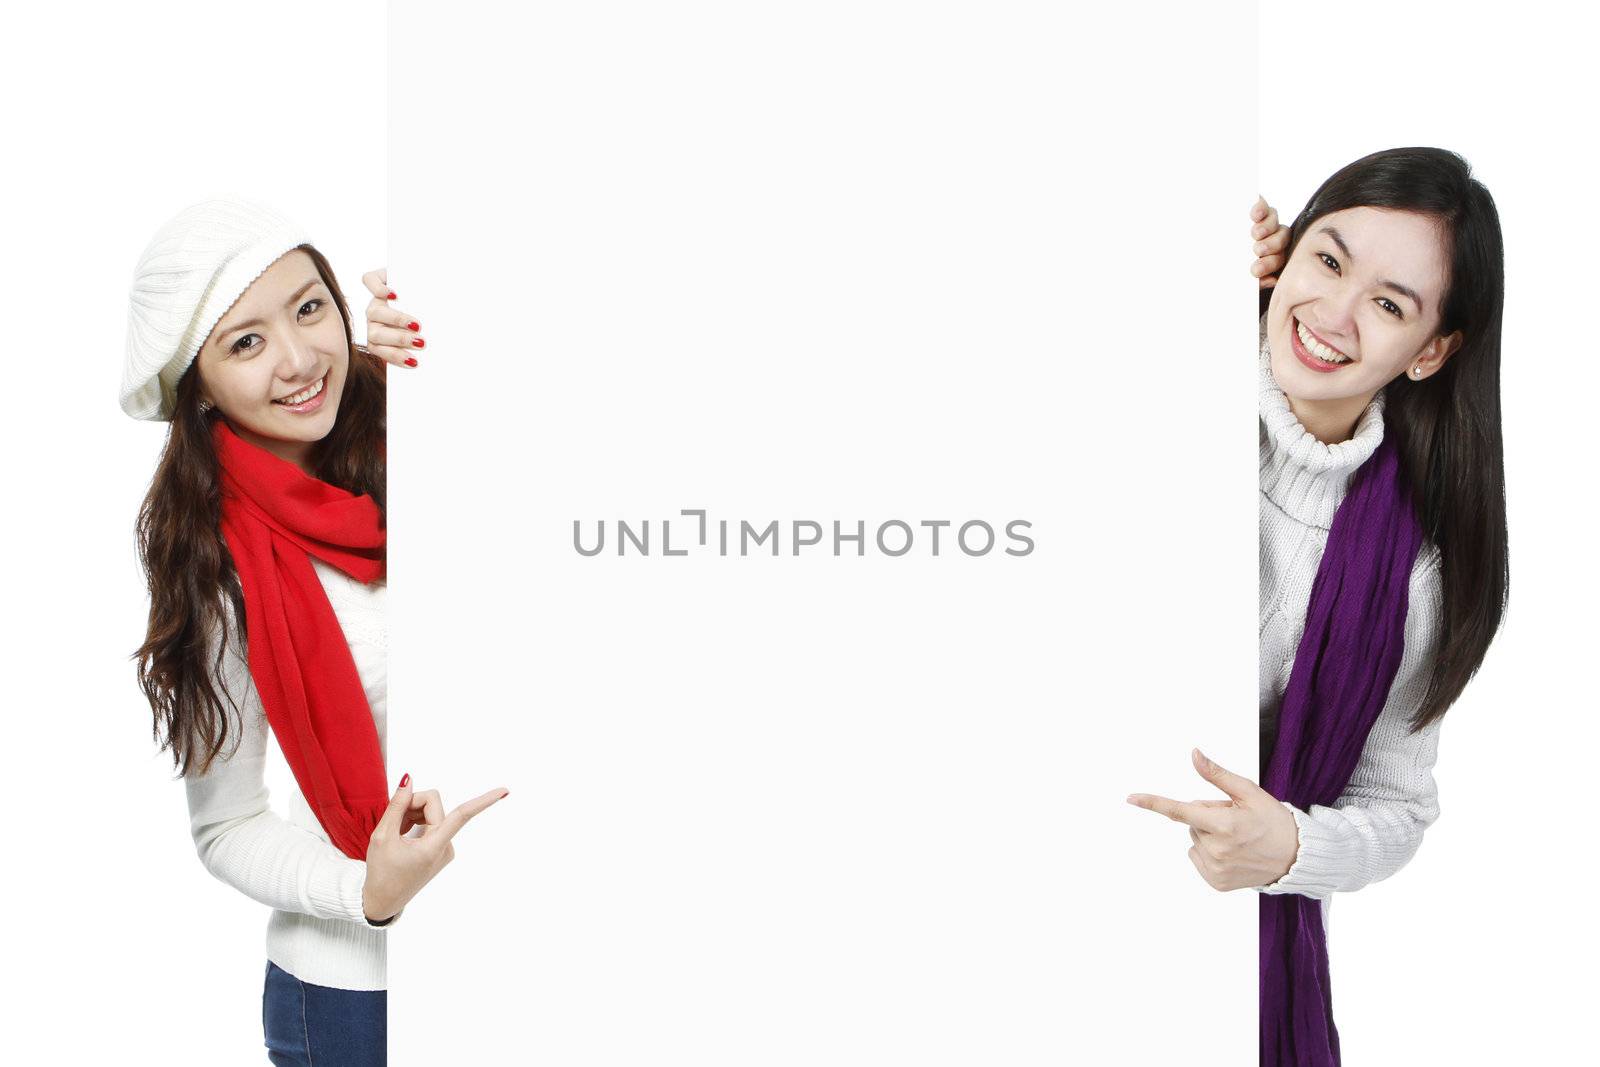 Blank space between two young women wearing winter or holiday attire